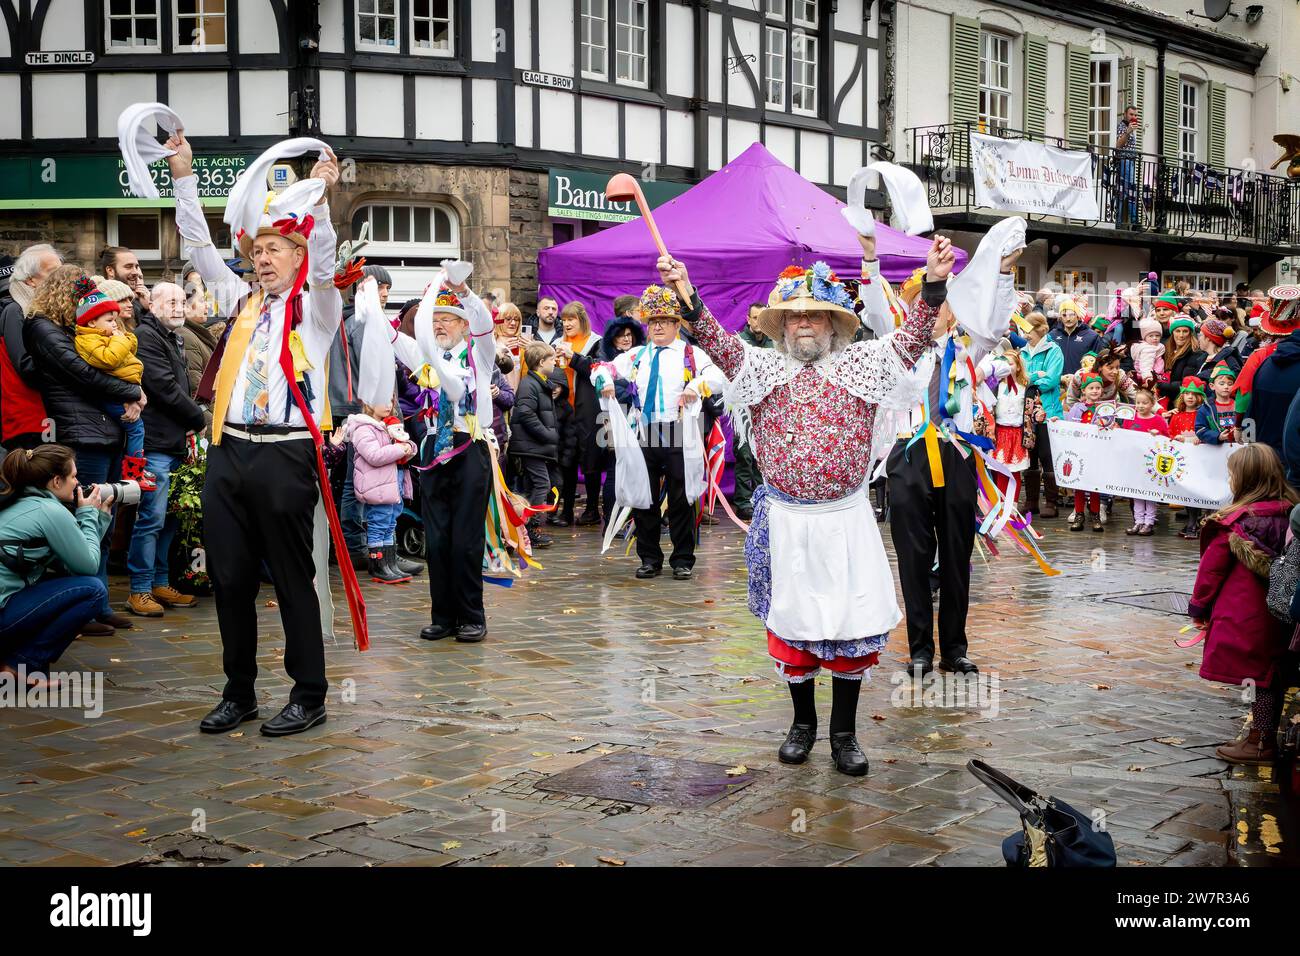 Several groups of Morris Dancers performed in the streets of Lymm, Cheshire, England, at their annual Dickensian Festival Stock Photo